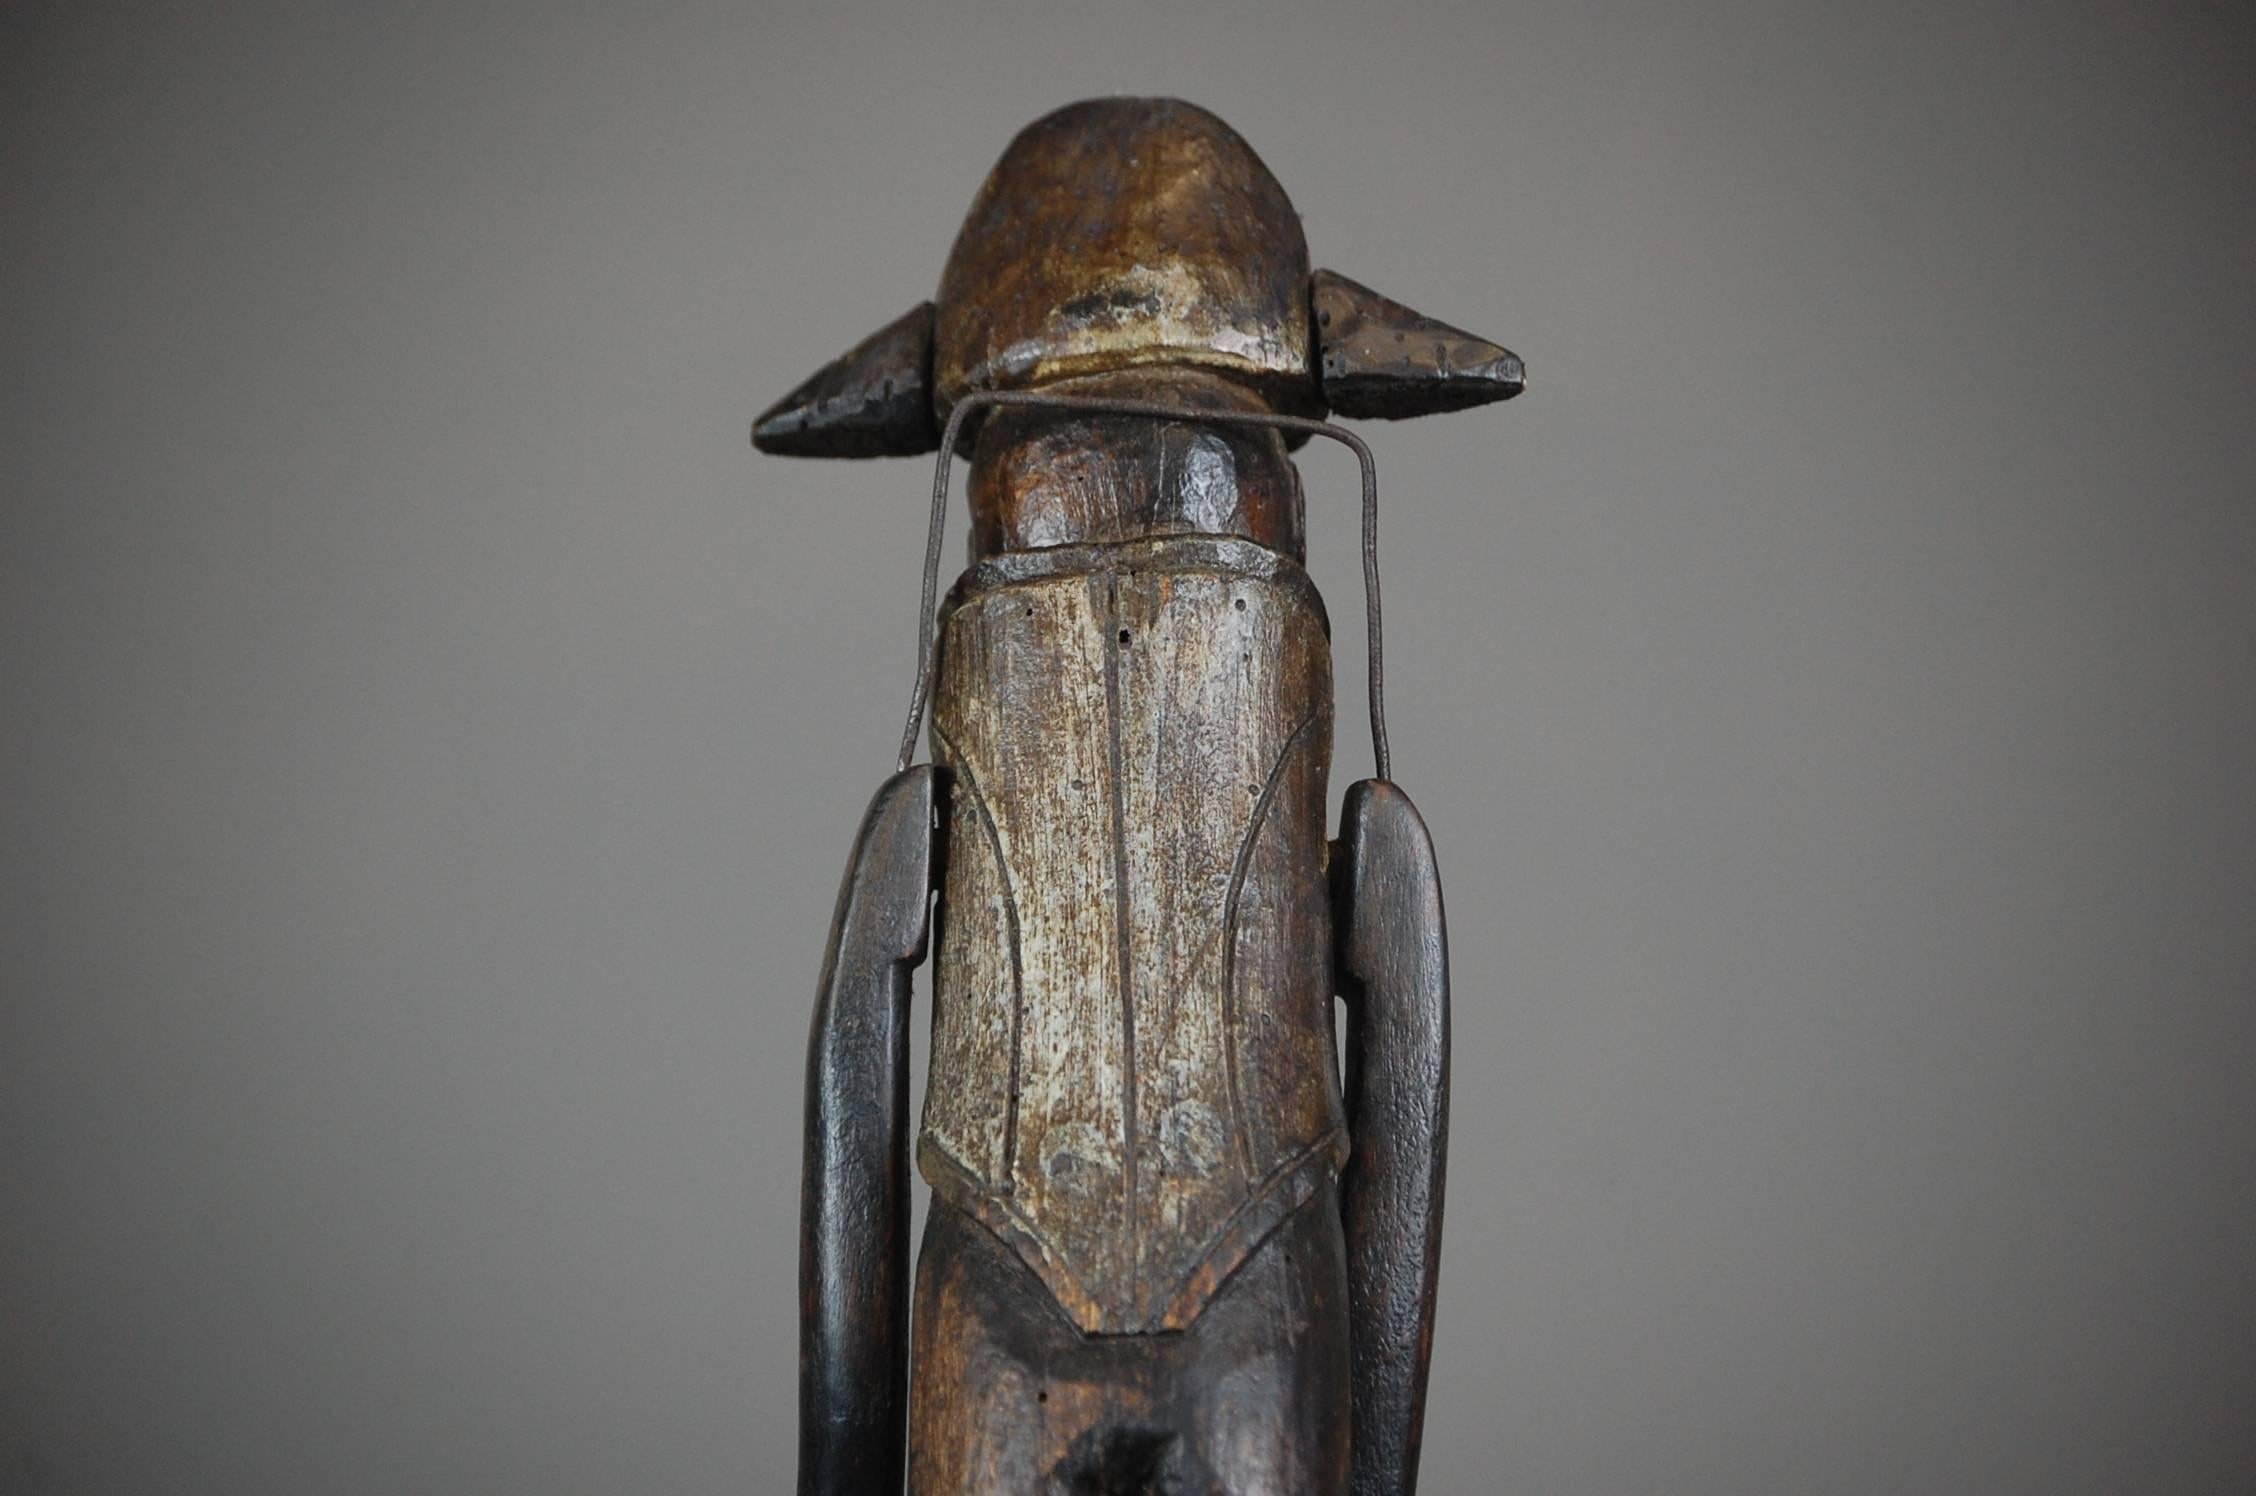 Naive carved wooden toy doll depicting a French soldier. More than likely made by a father to give to his son. The lever to the rear when pulled lifts the dolls arms up and down accordingly in a 